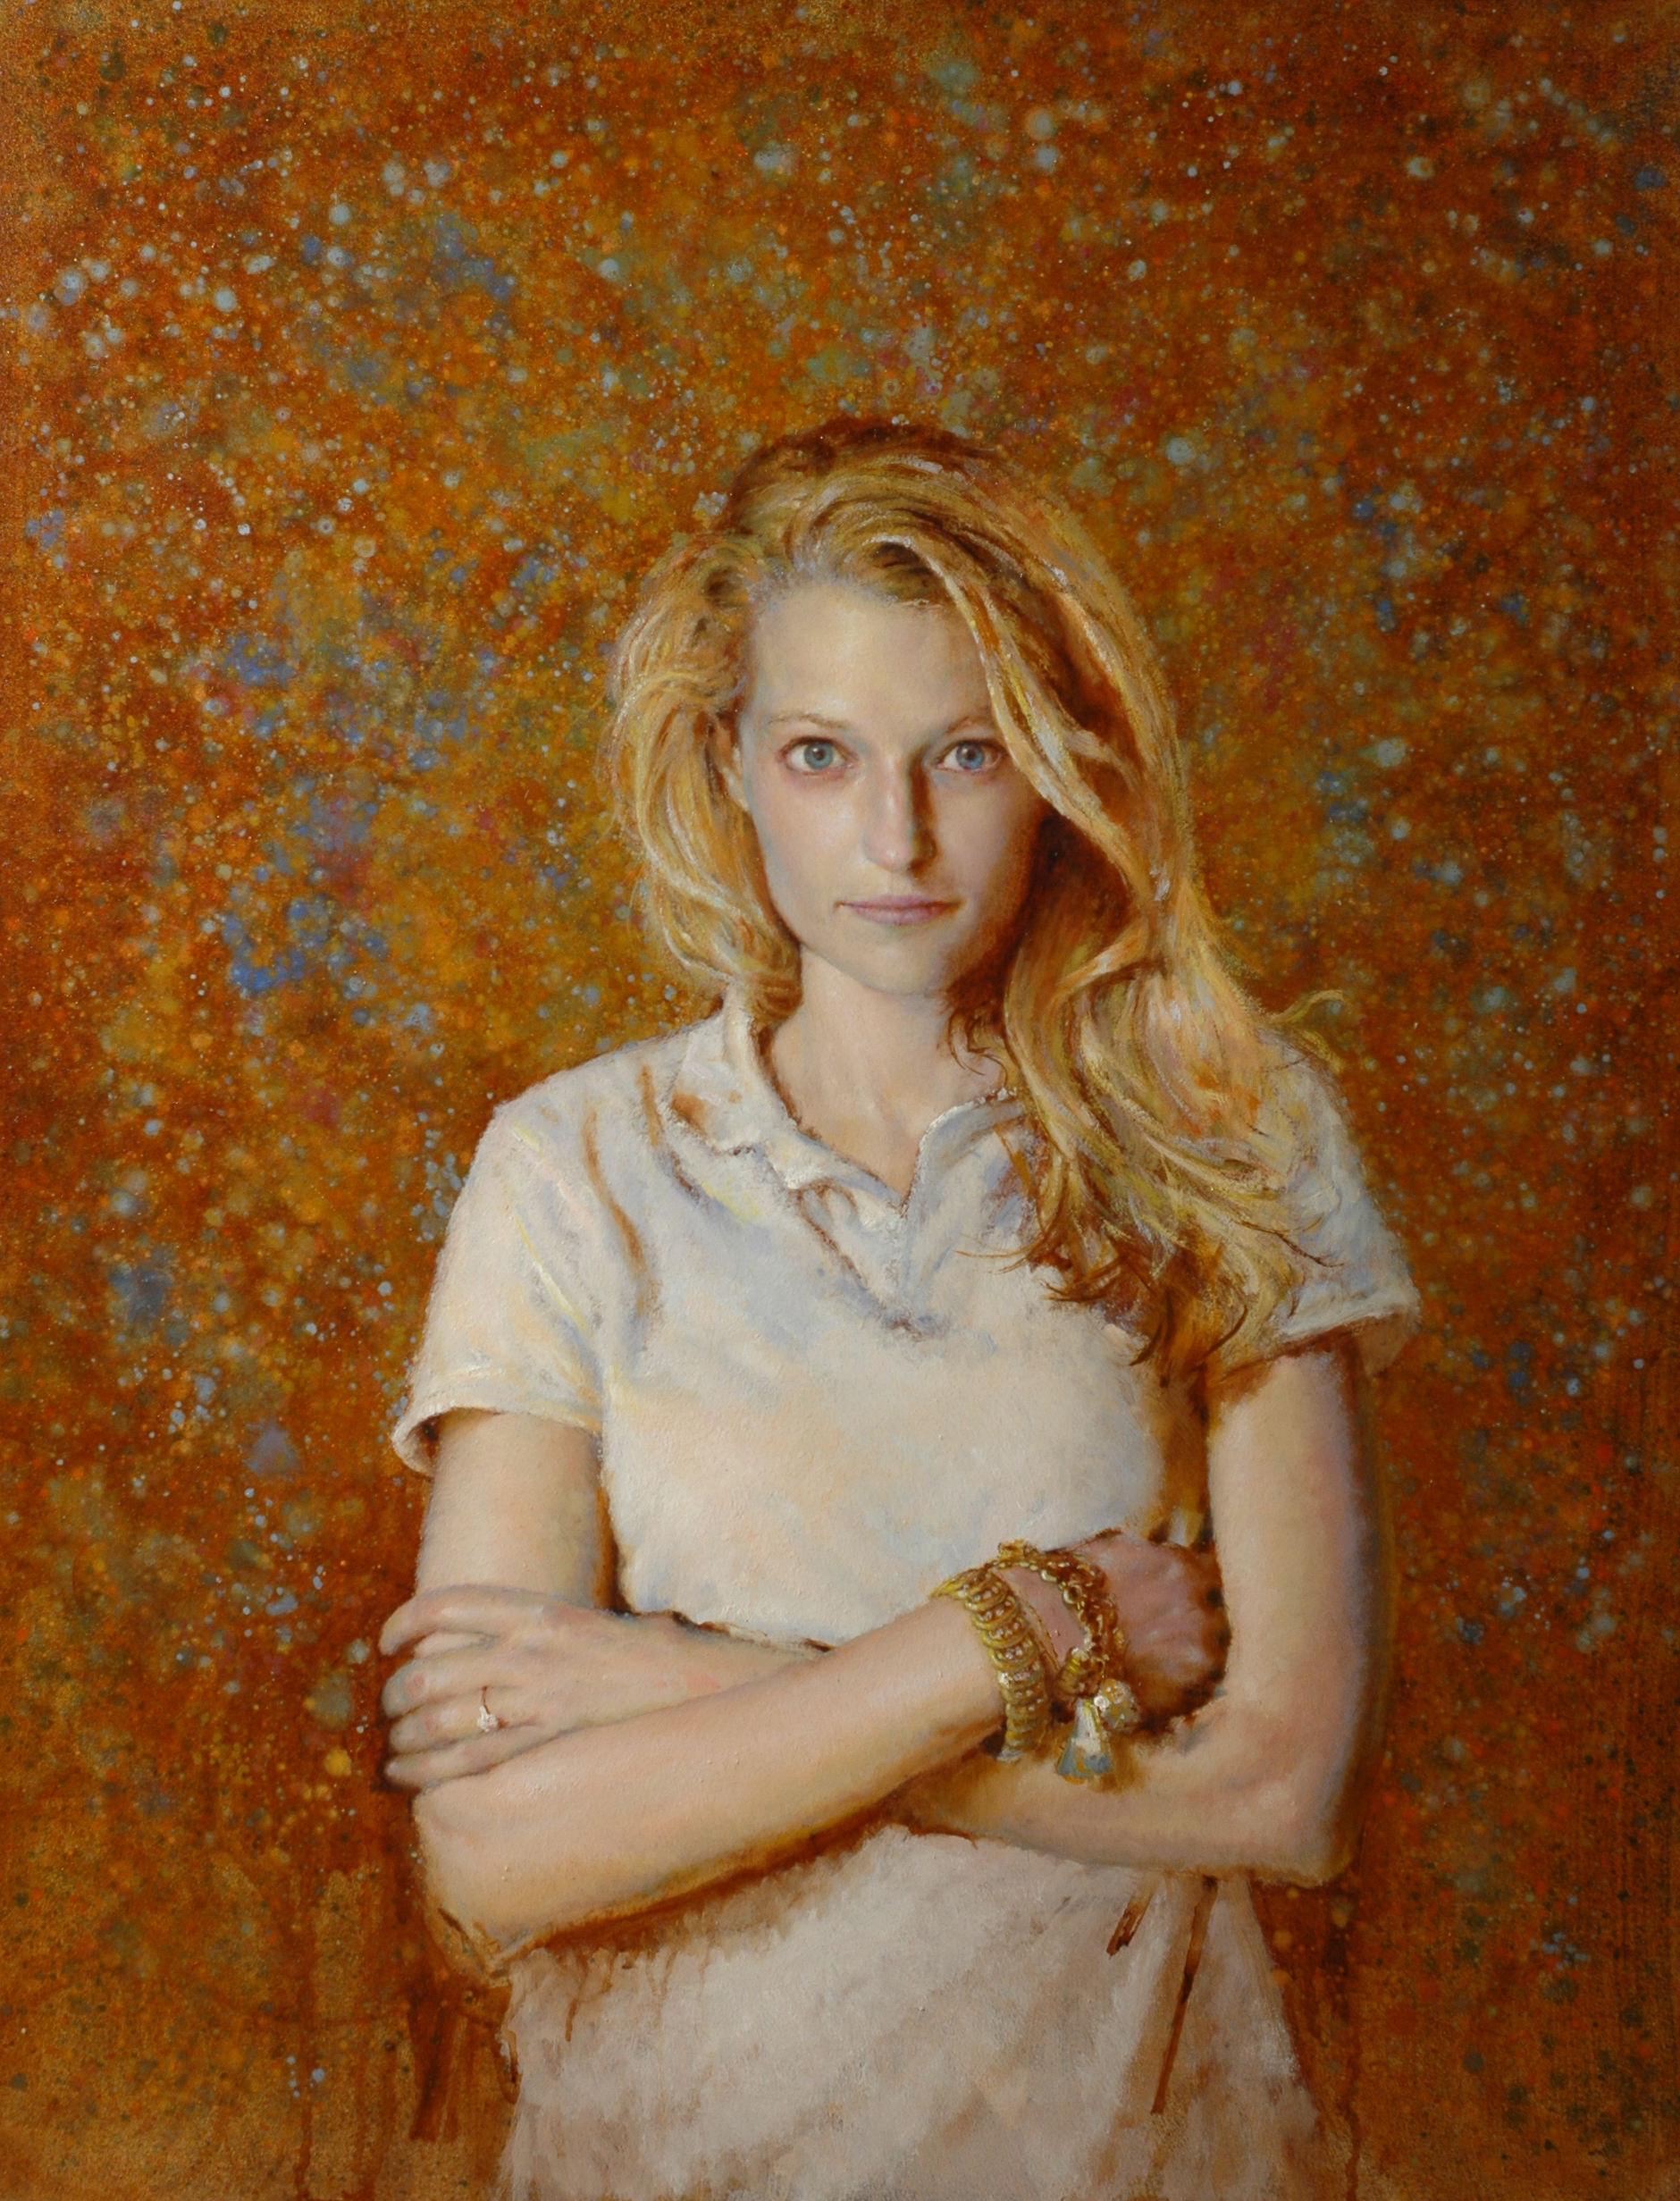 Painting portraits - Seth Havercamp, "Virginia," 31 x 24 inches, Oil on linen